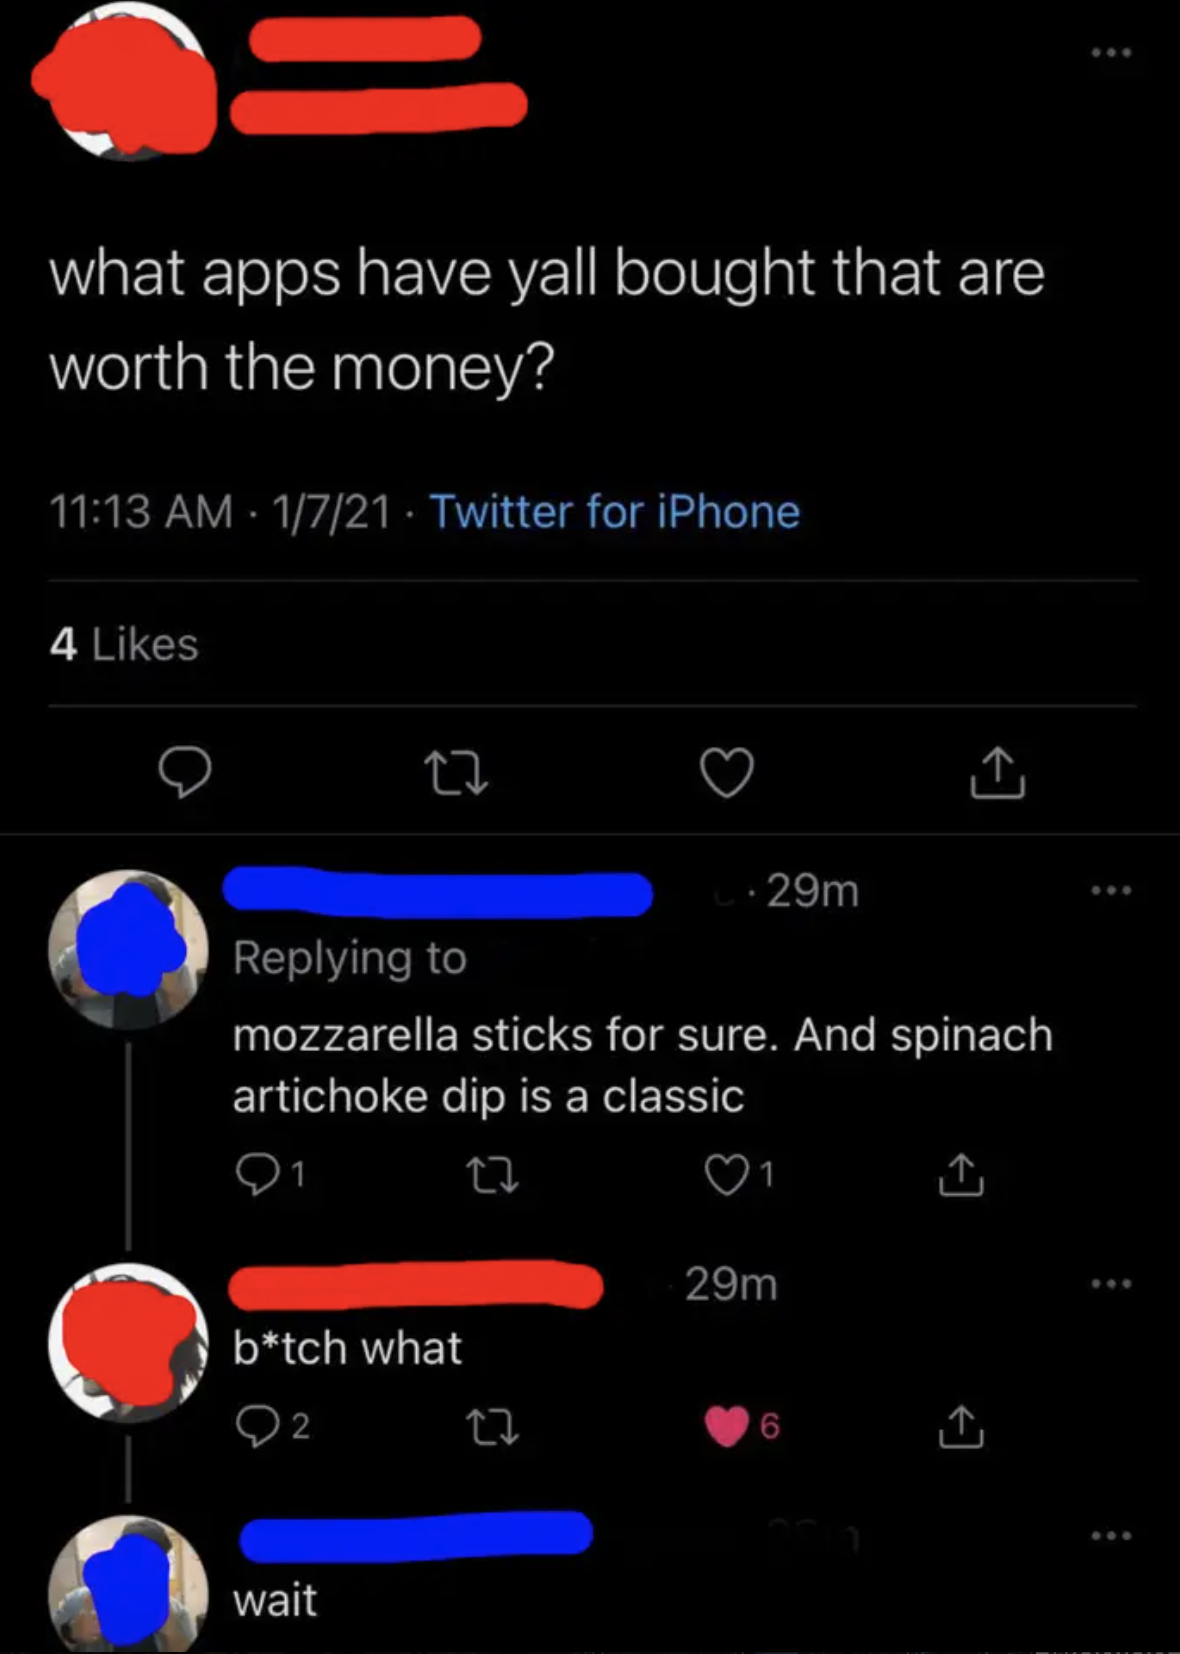 tweets about someone asking about what apps are worth it and the other person thinks they mean food